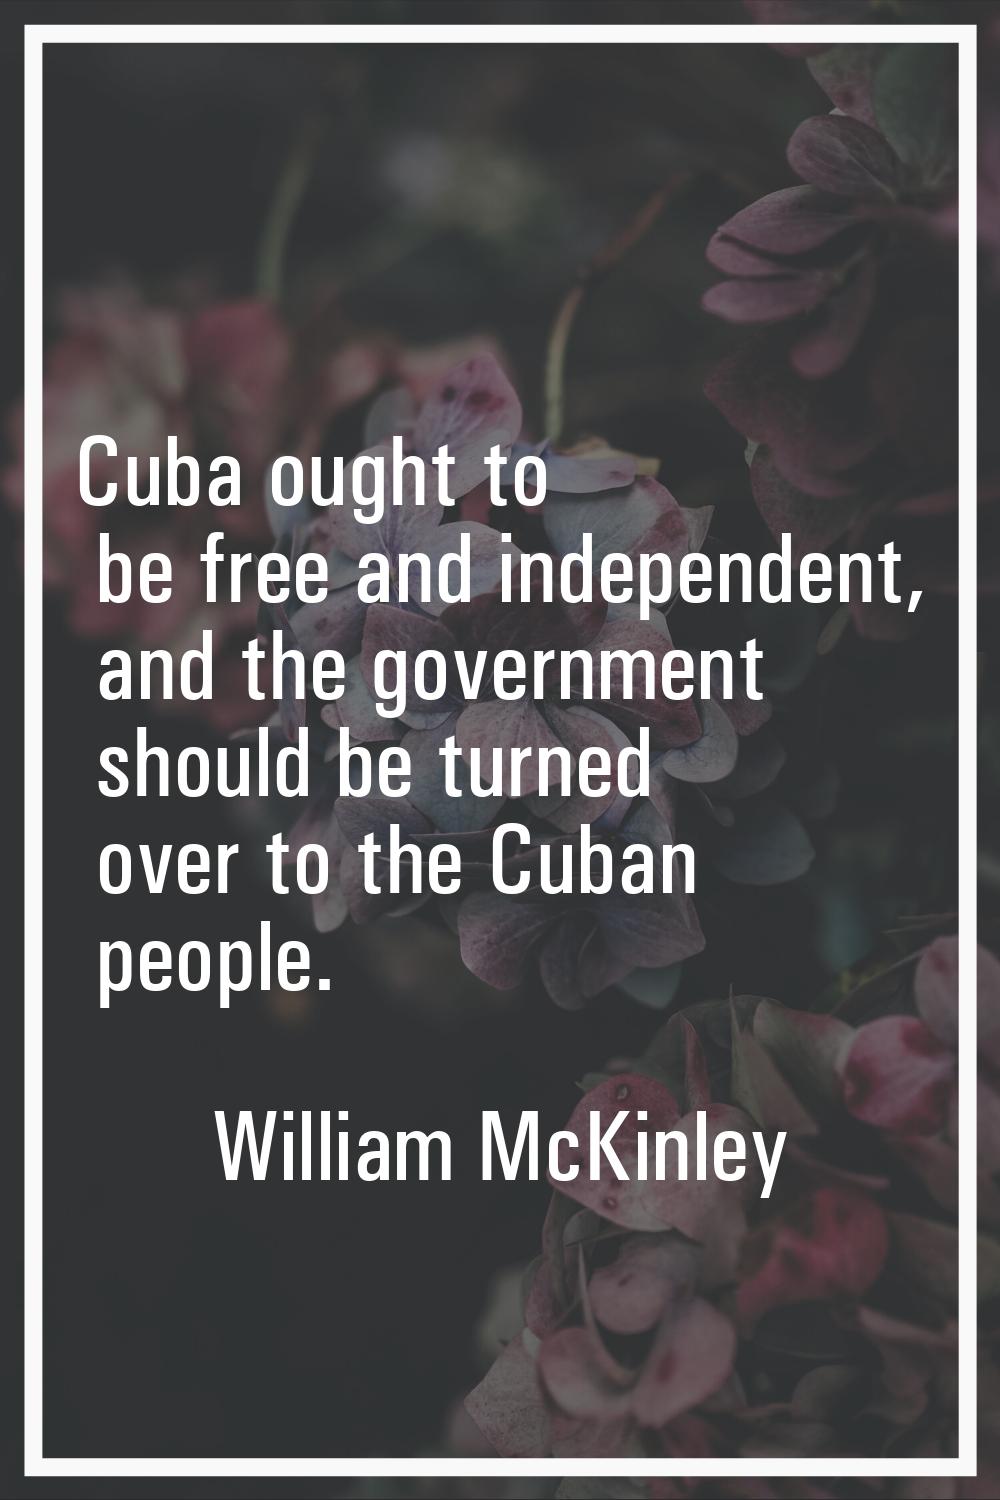 Cuba ought to be free and independent, and the government should be turned over to the Cuban people